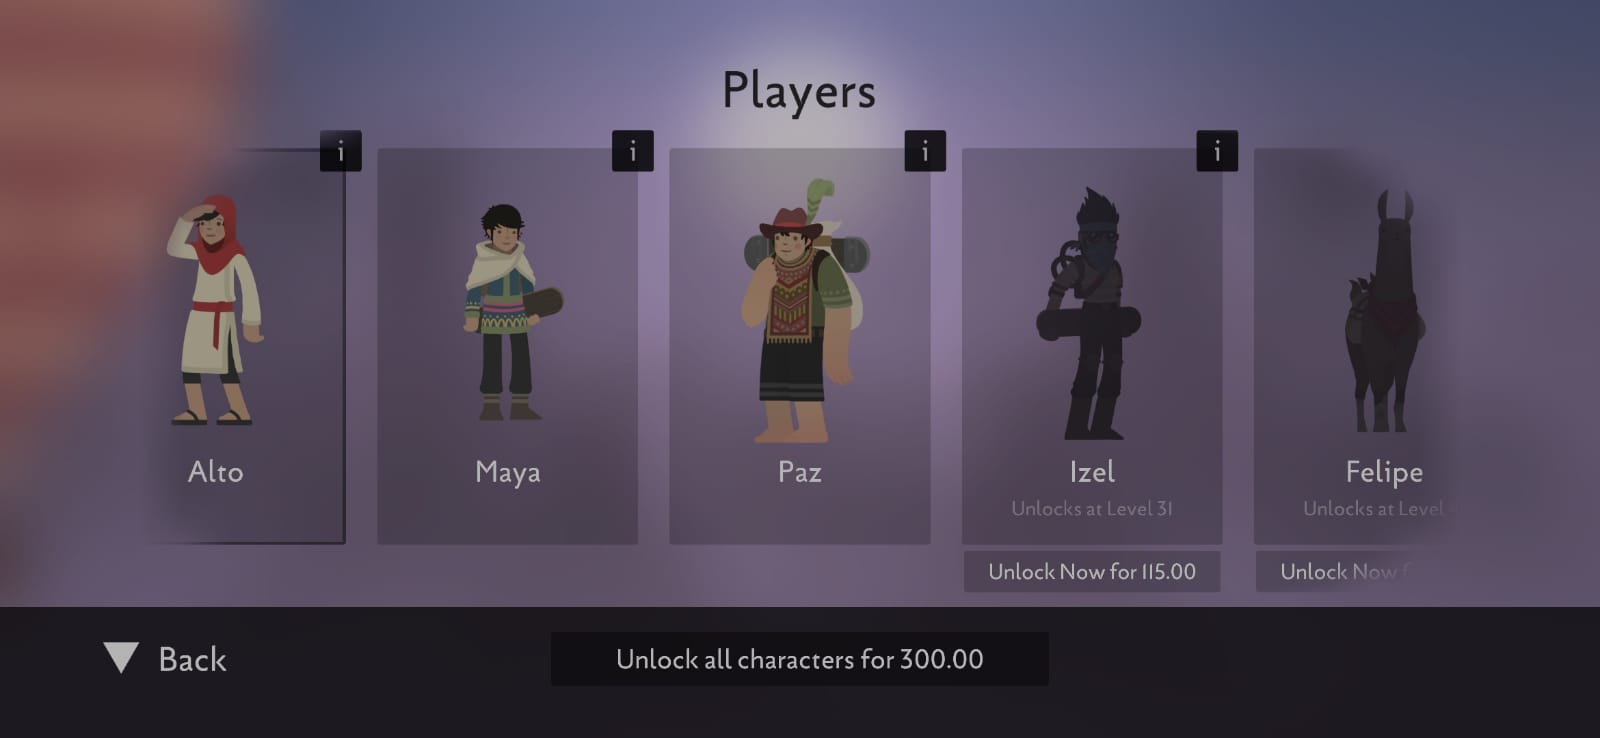 You can also choose a wide range of characters/avatars